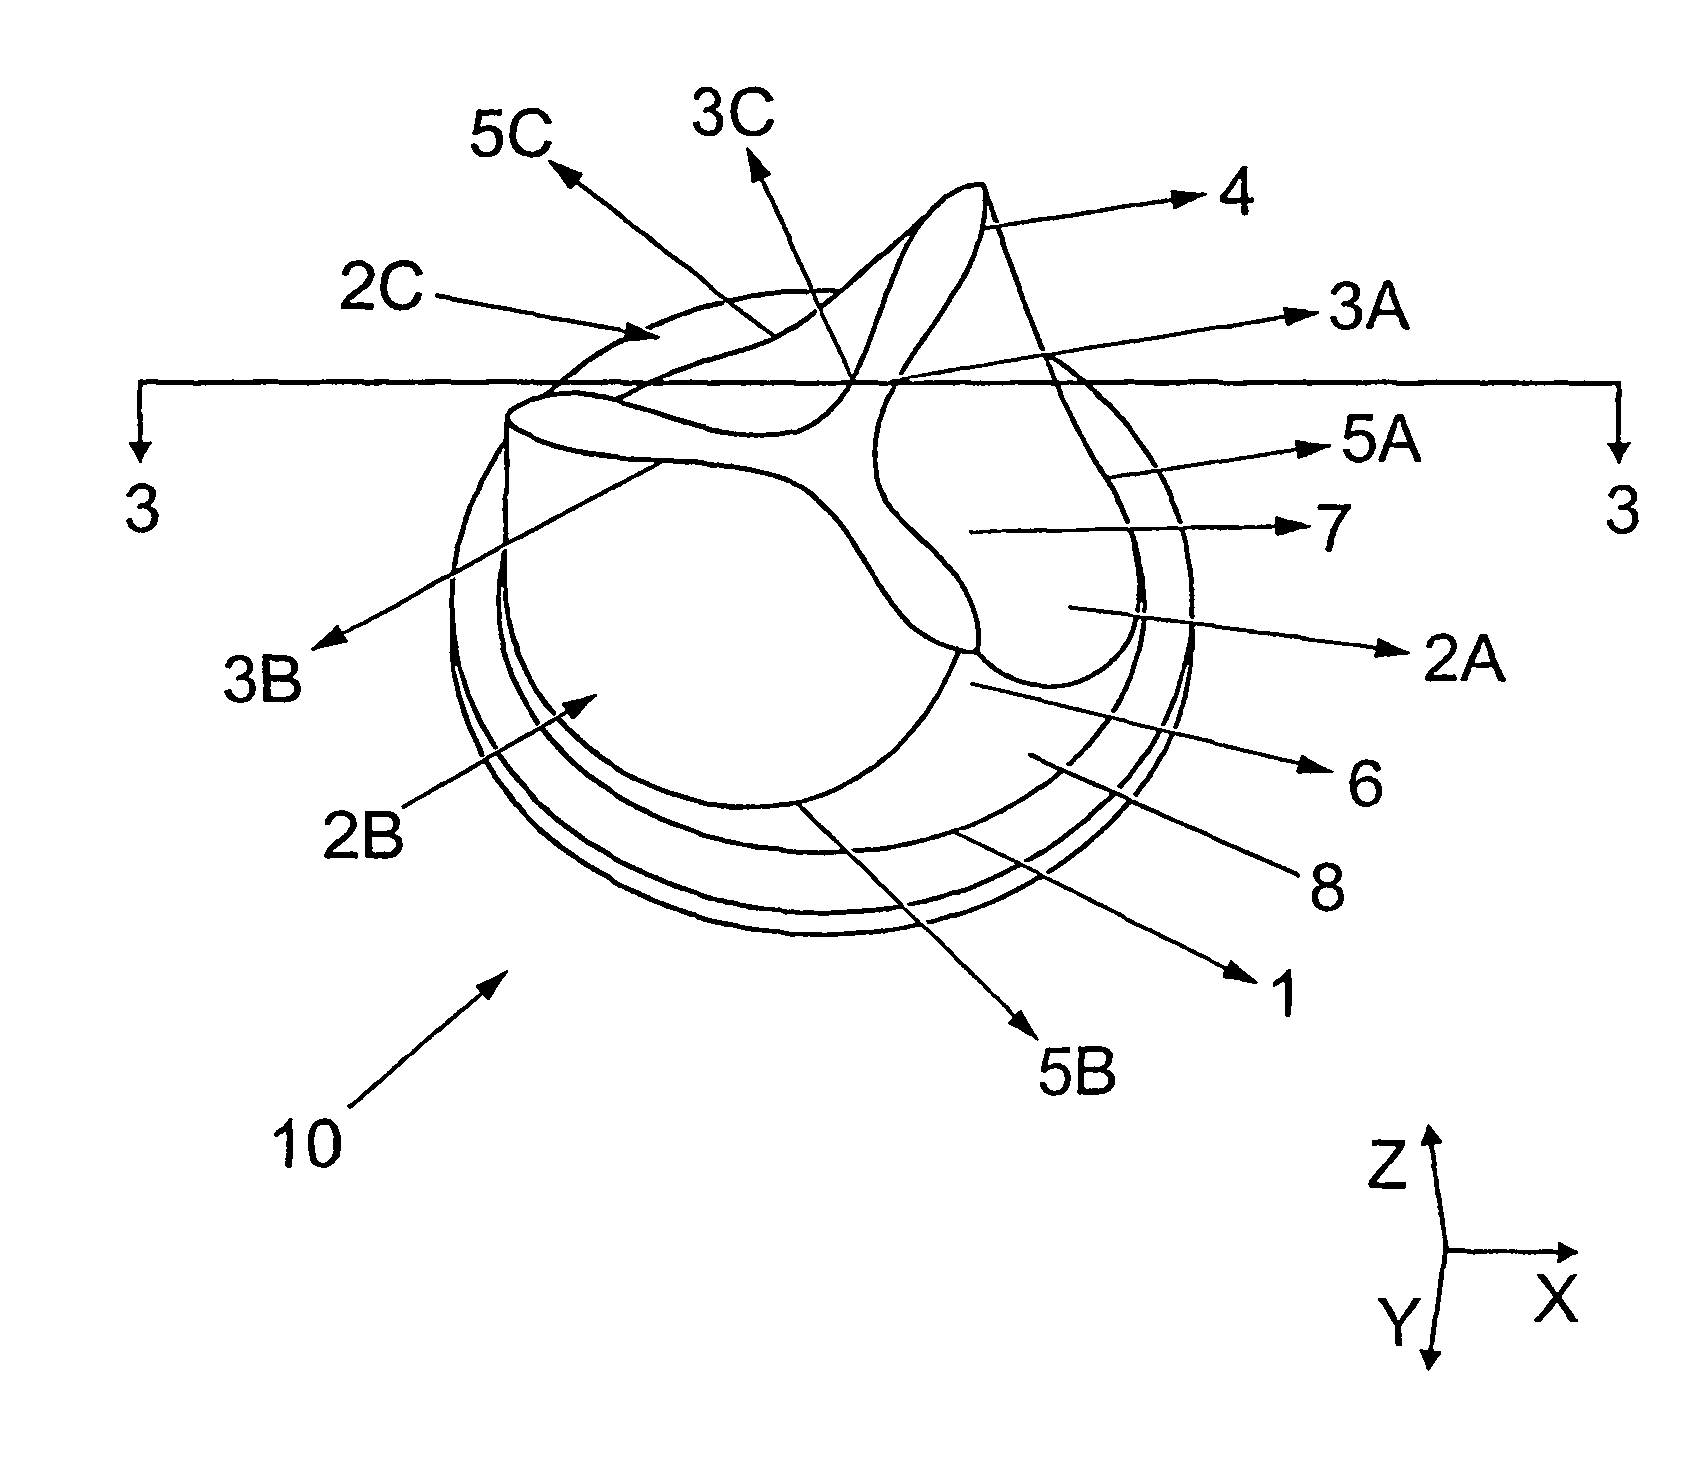 Heart valve prosthesis and method of manufacture